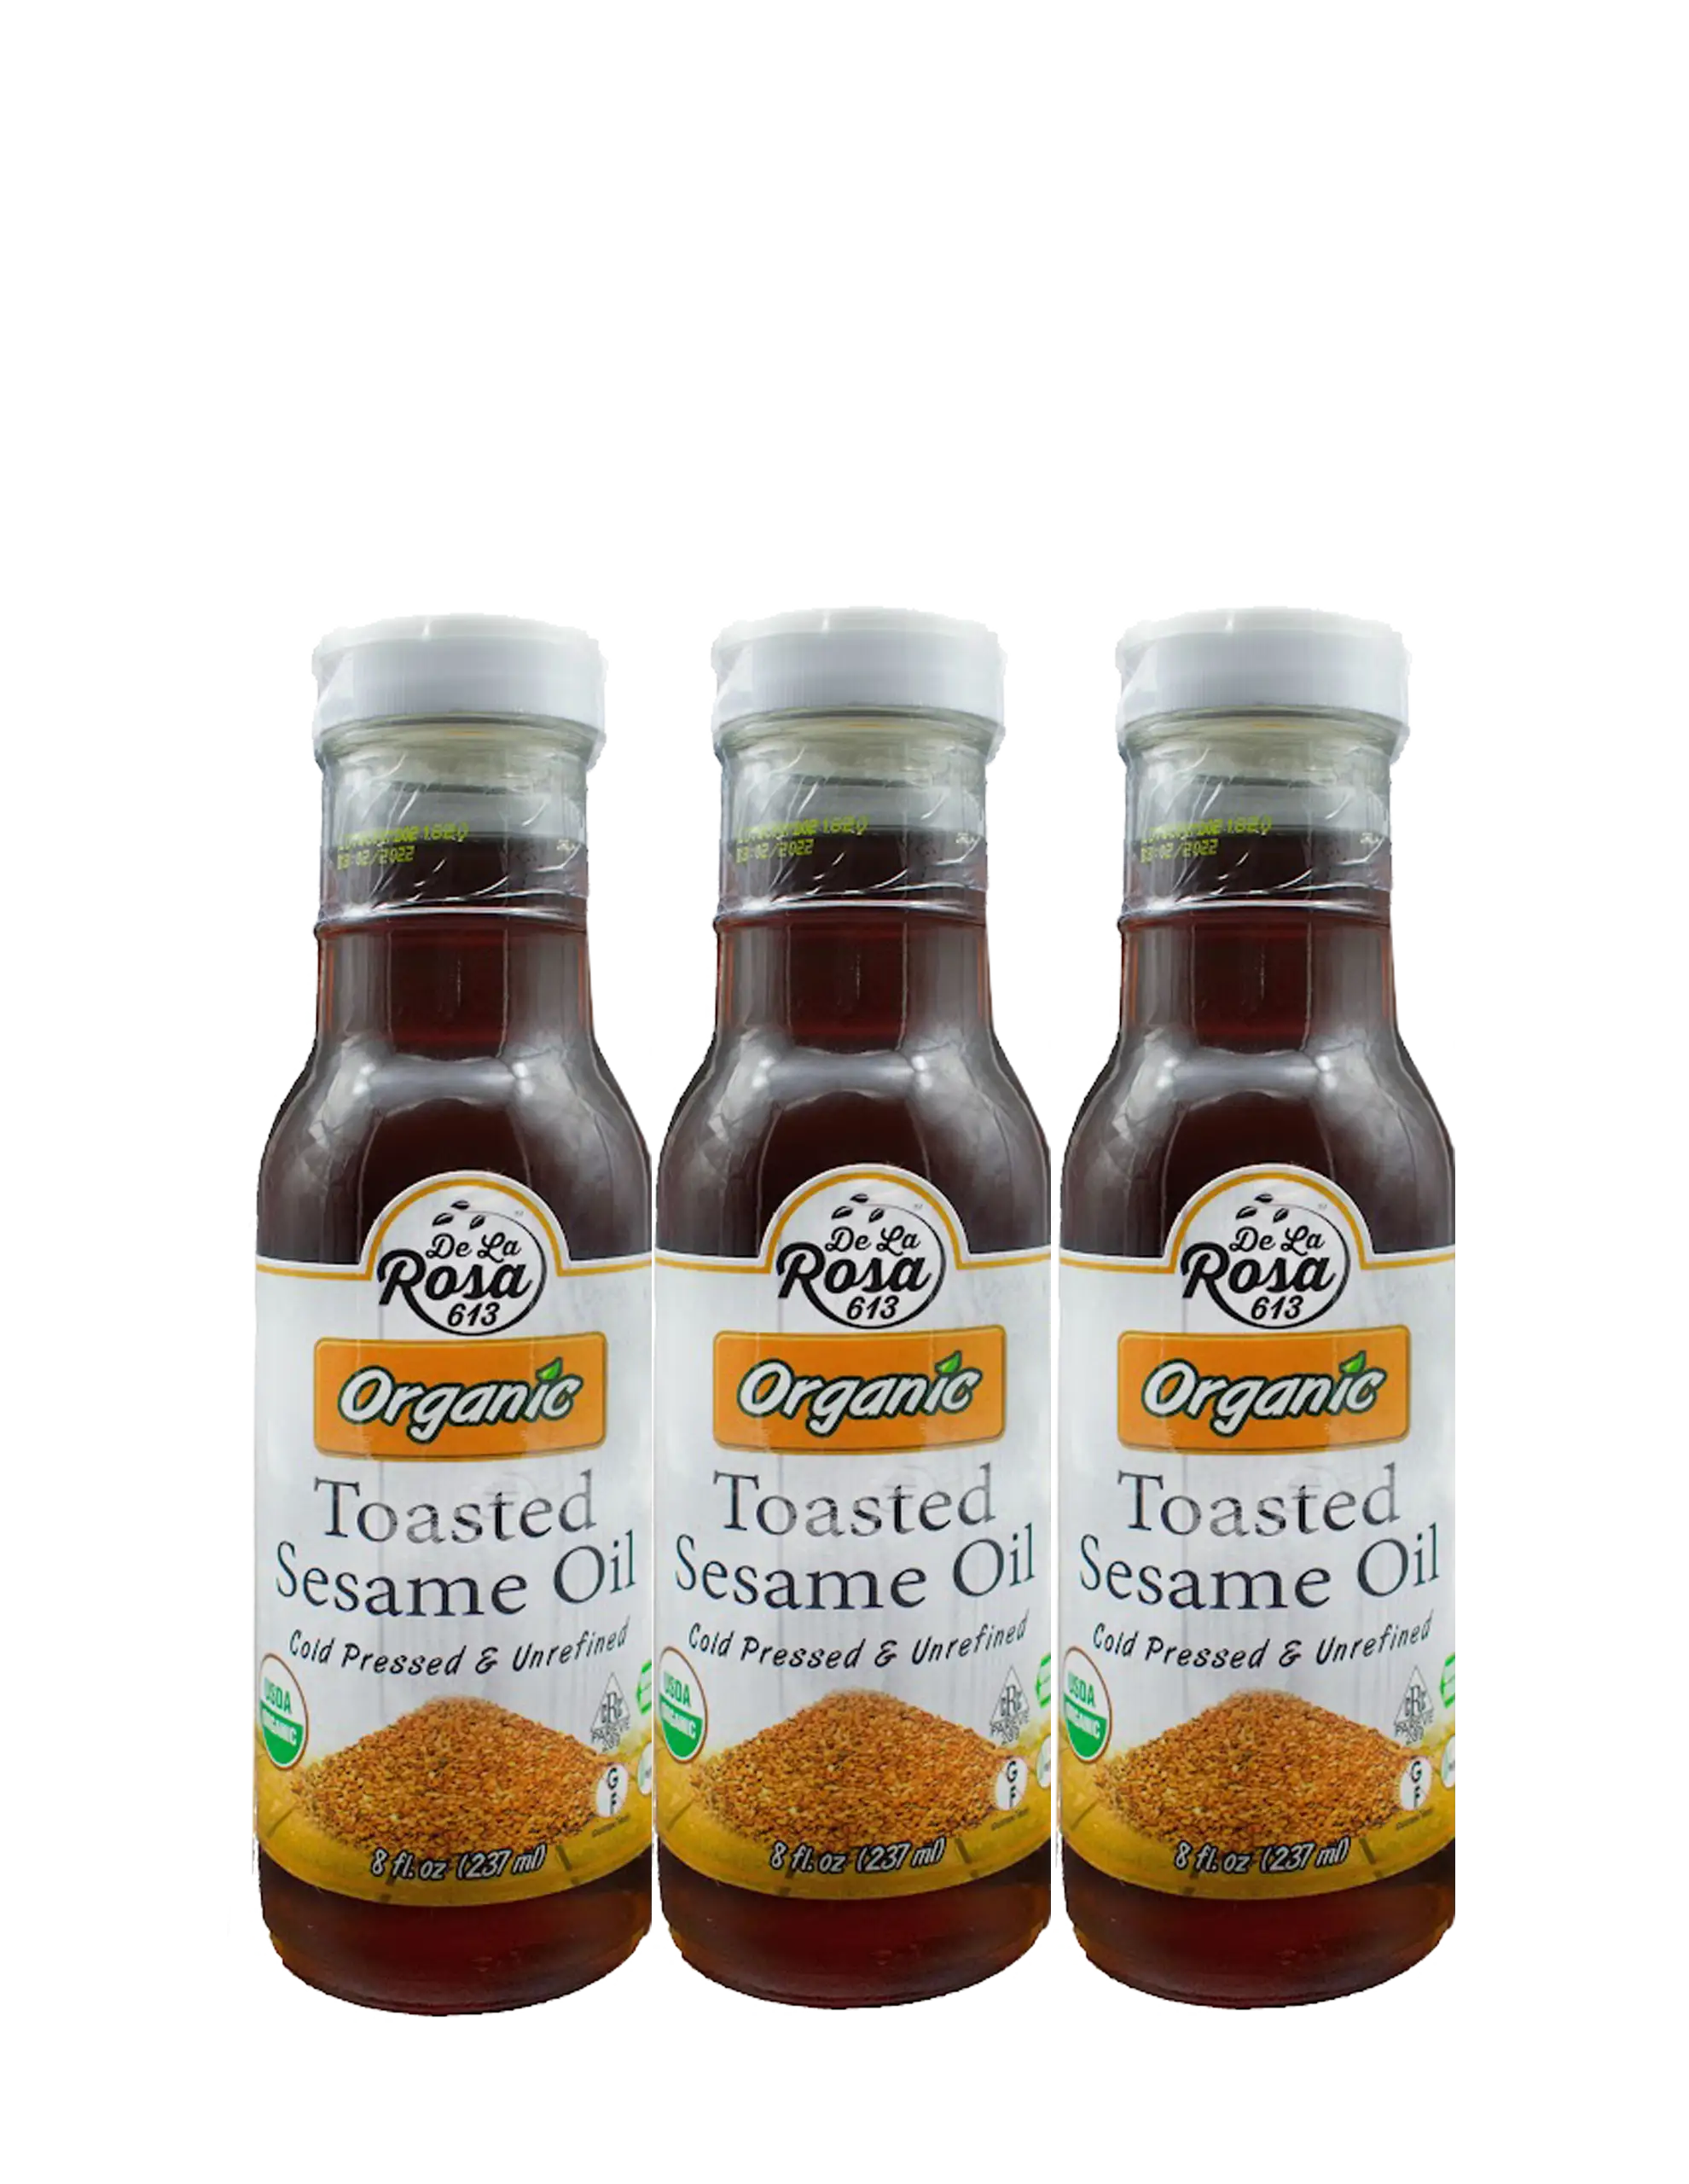 ORGANIC TOASTED SESAME OIL 3PACK